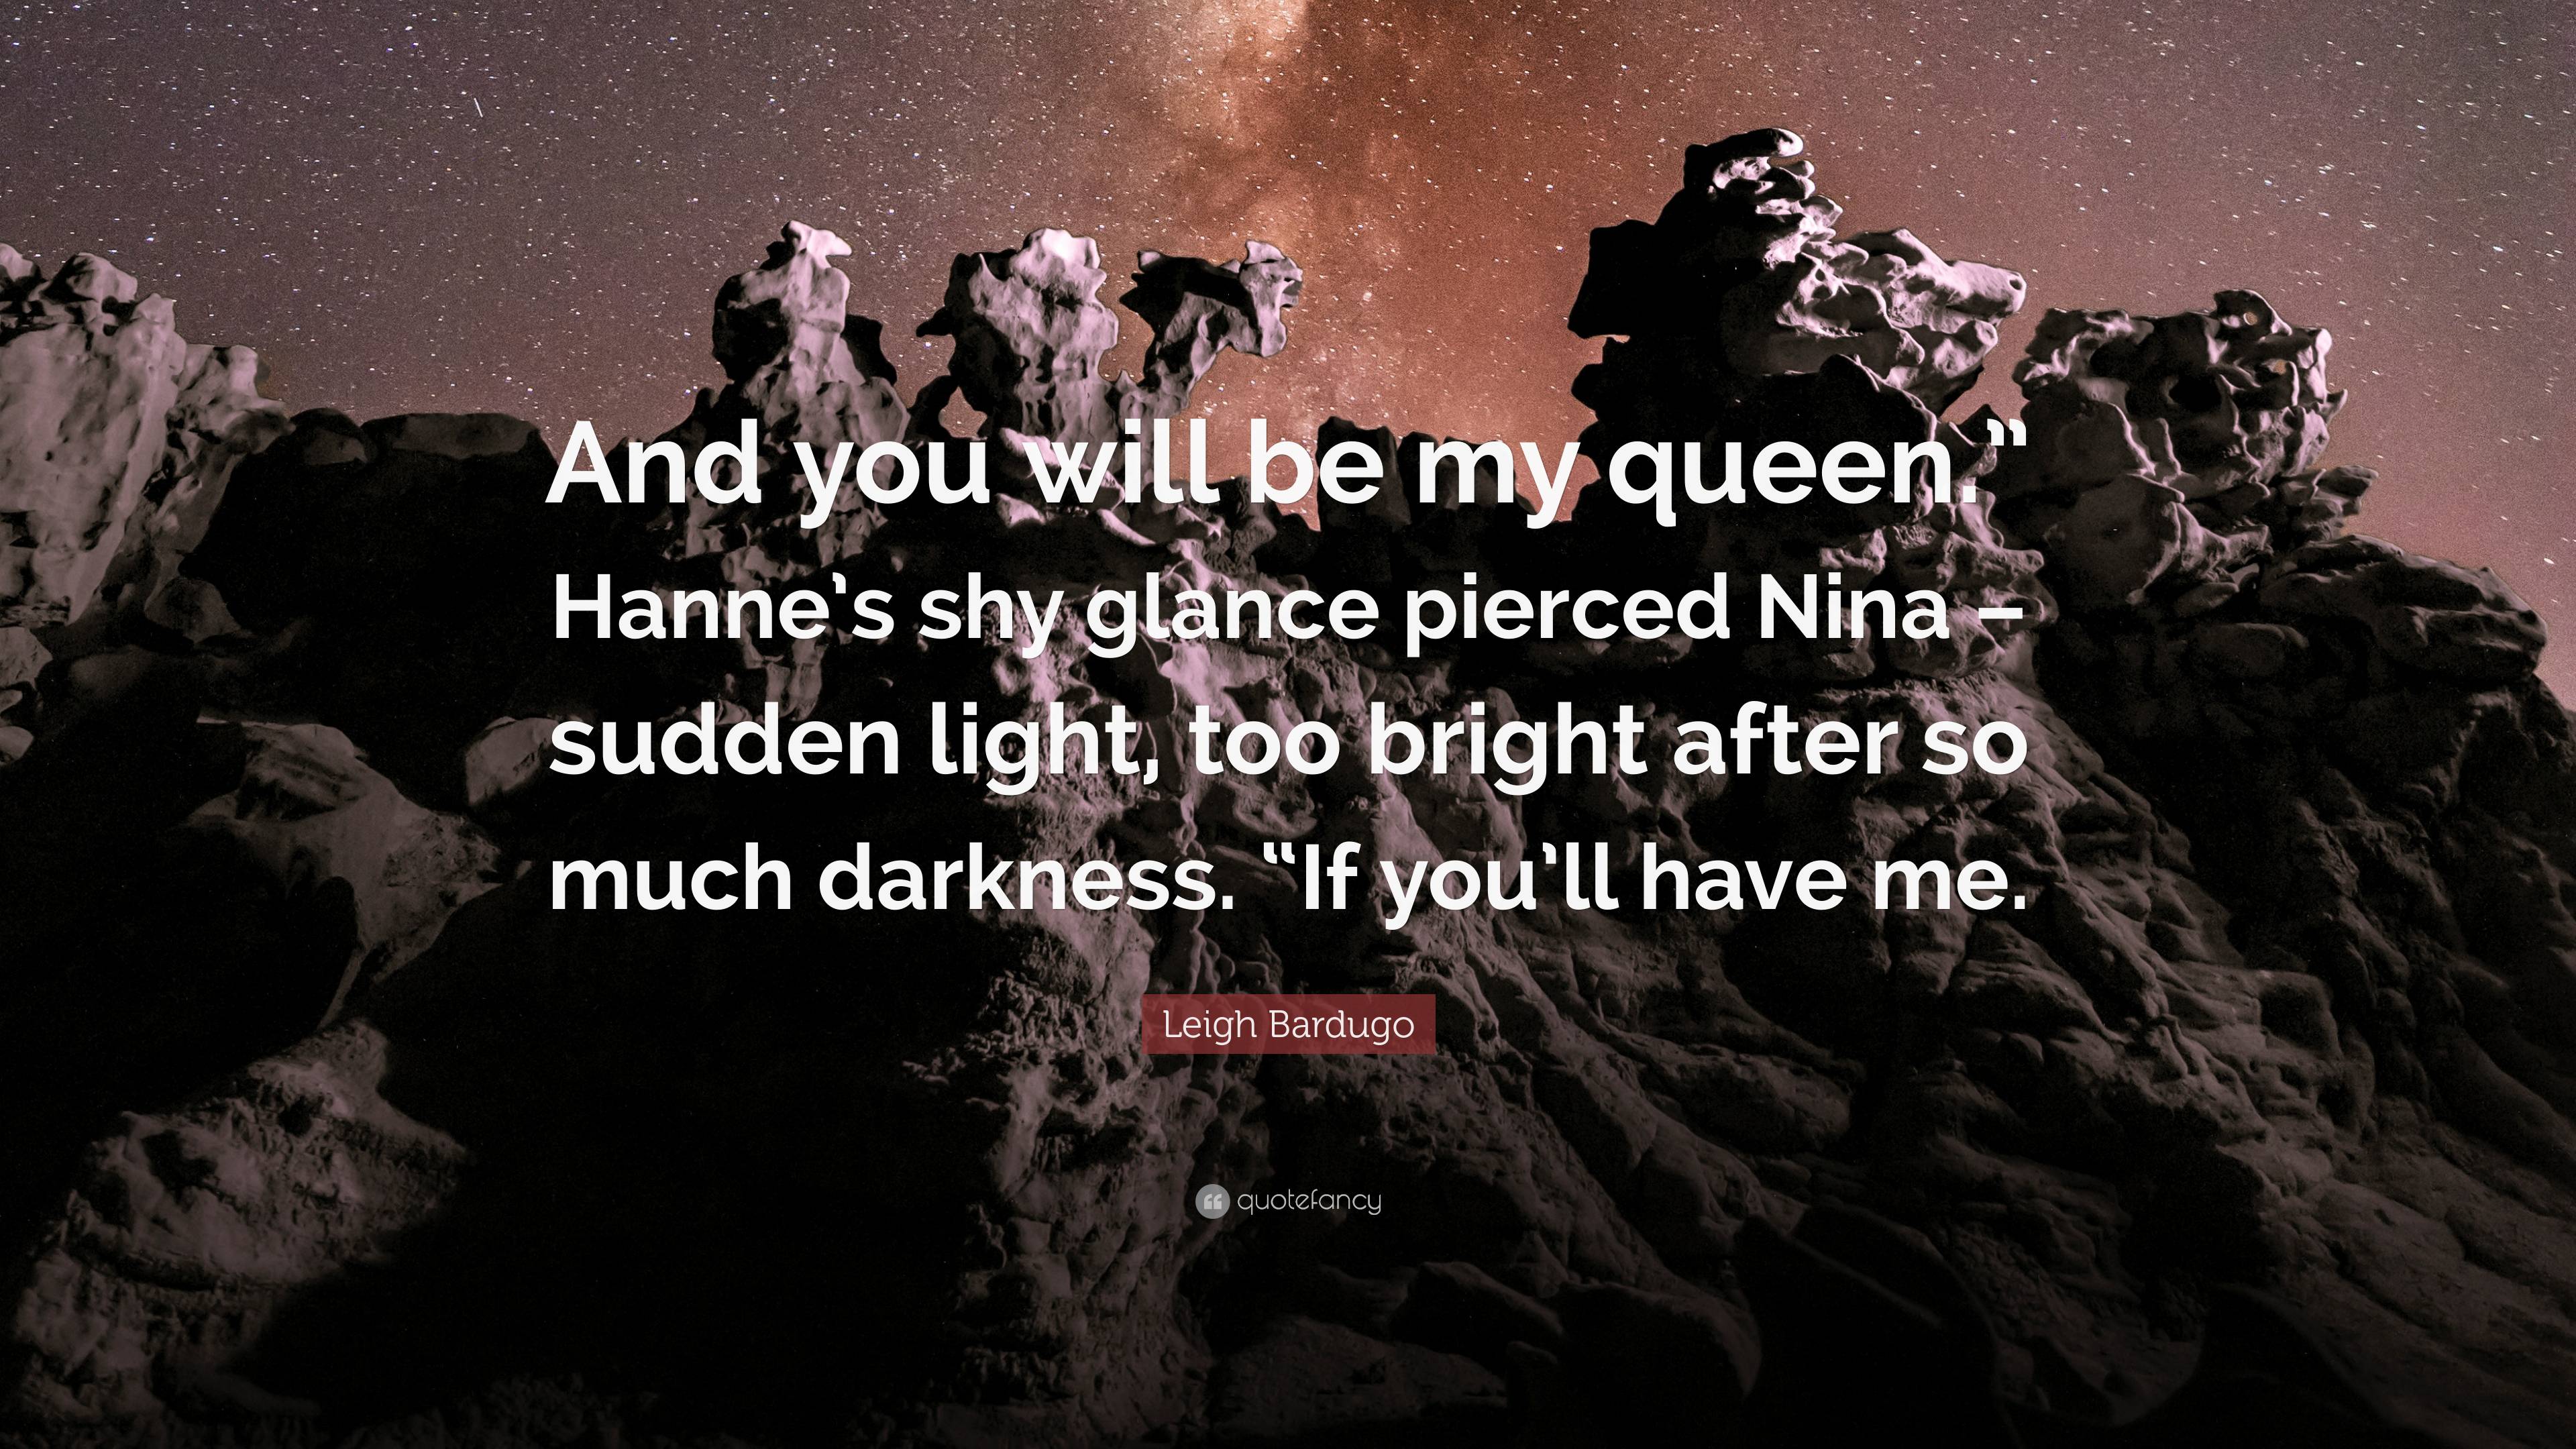 Leigh Bardugo Quote: “And you will be my queen.” Hanne's shy